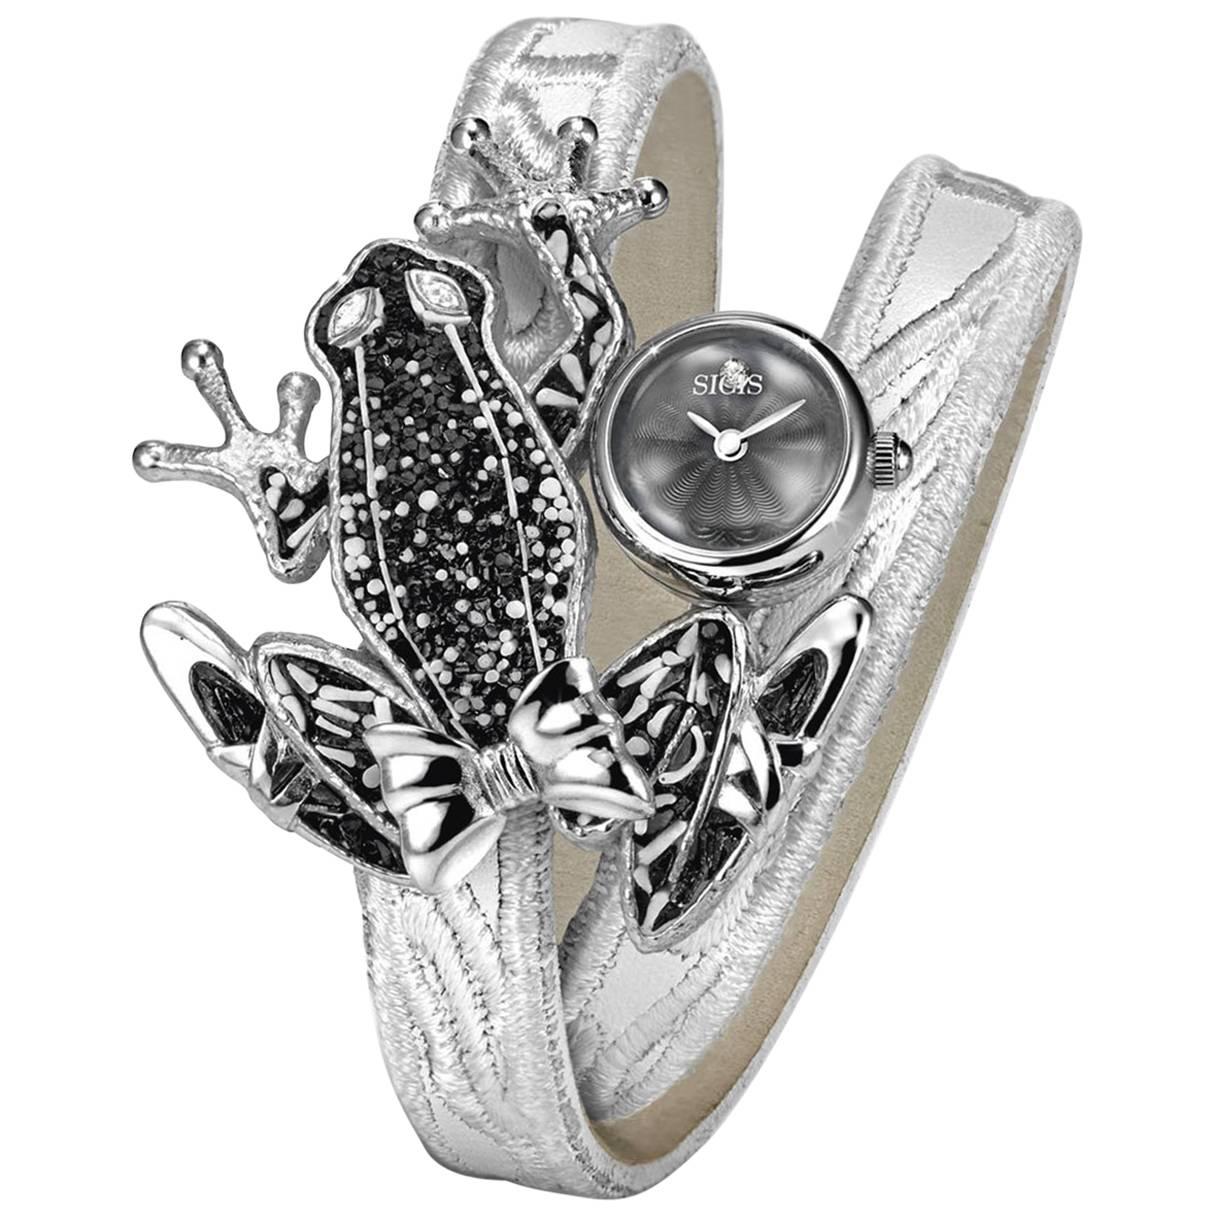 Stylish Wristwatch Silver White Diamonds Guilloche Dial Decorated Micromosaic